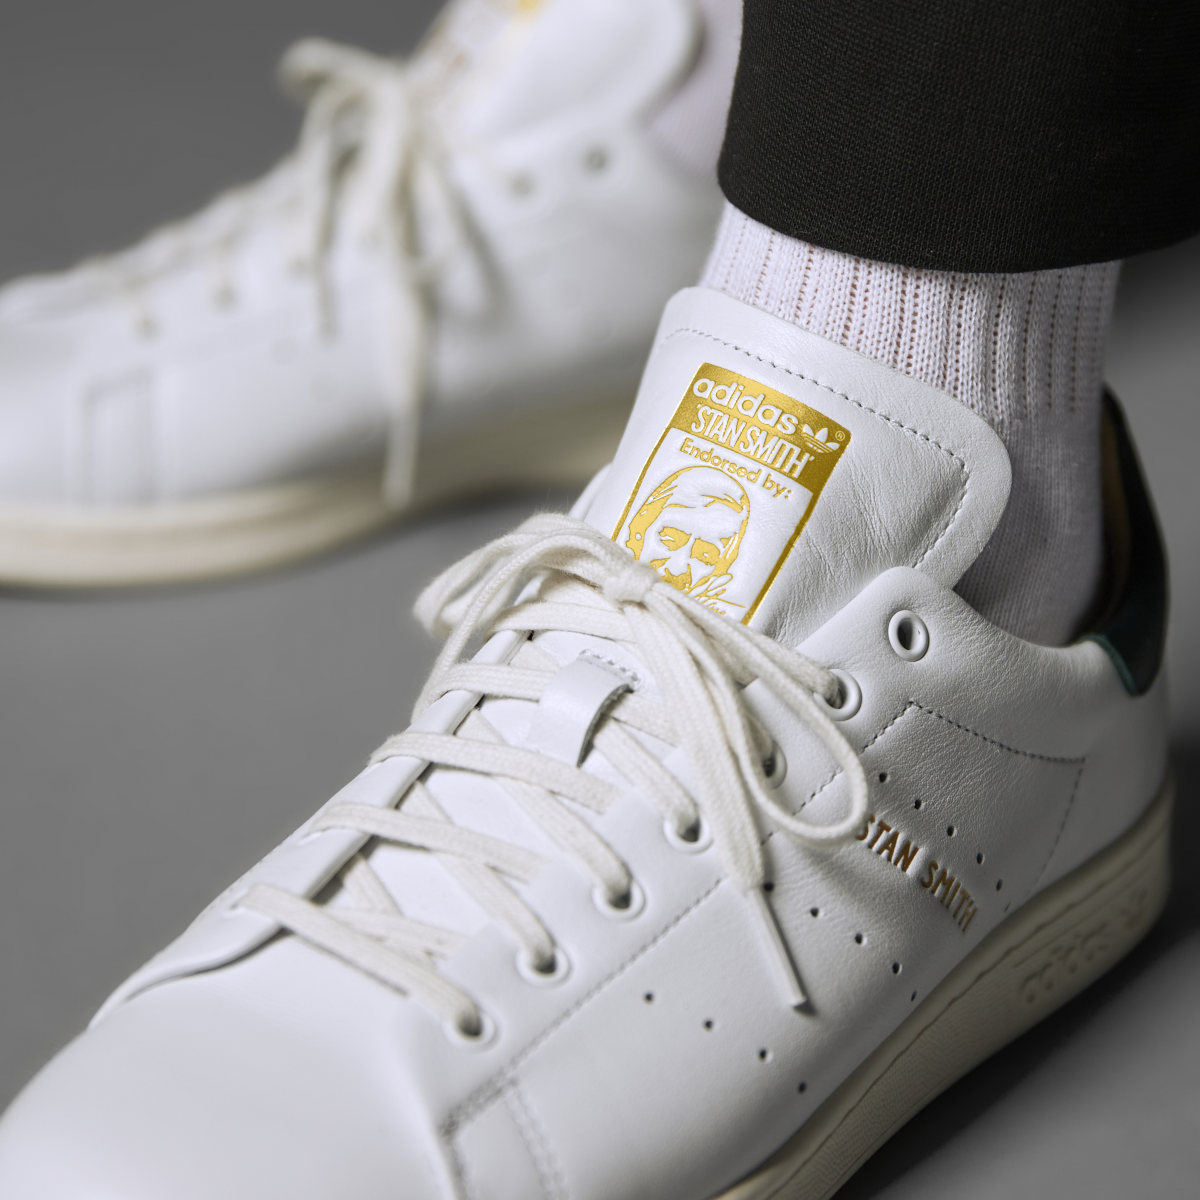 Adidas Stan Smith Lux Shoes. 7